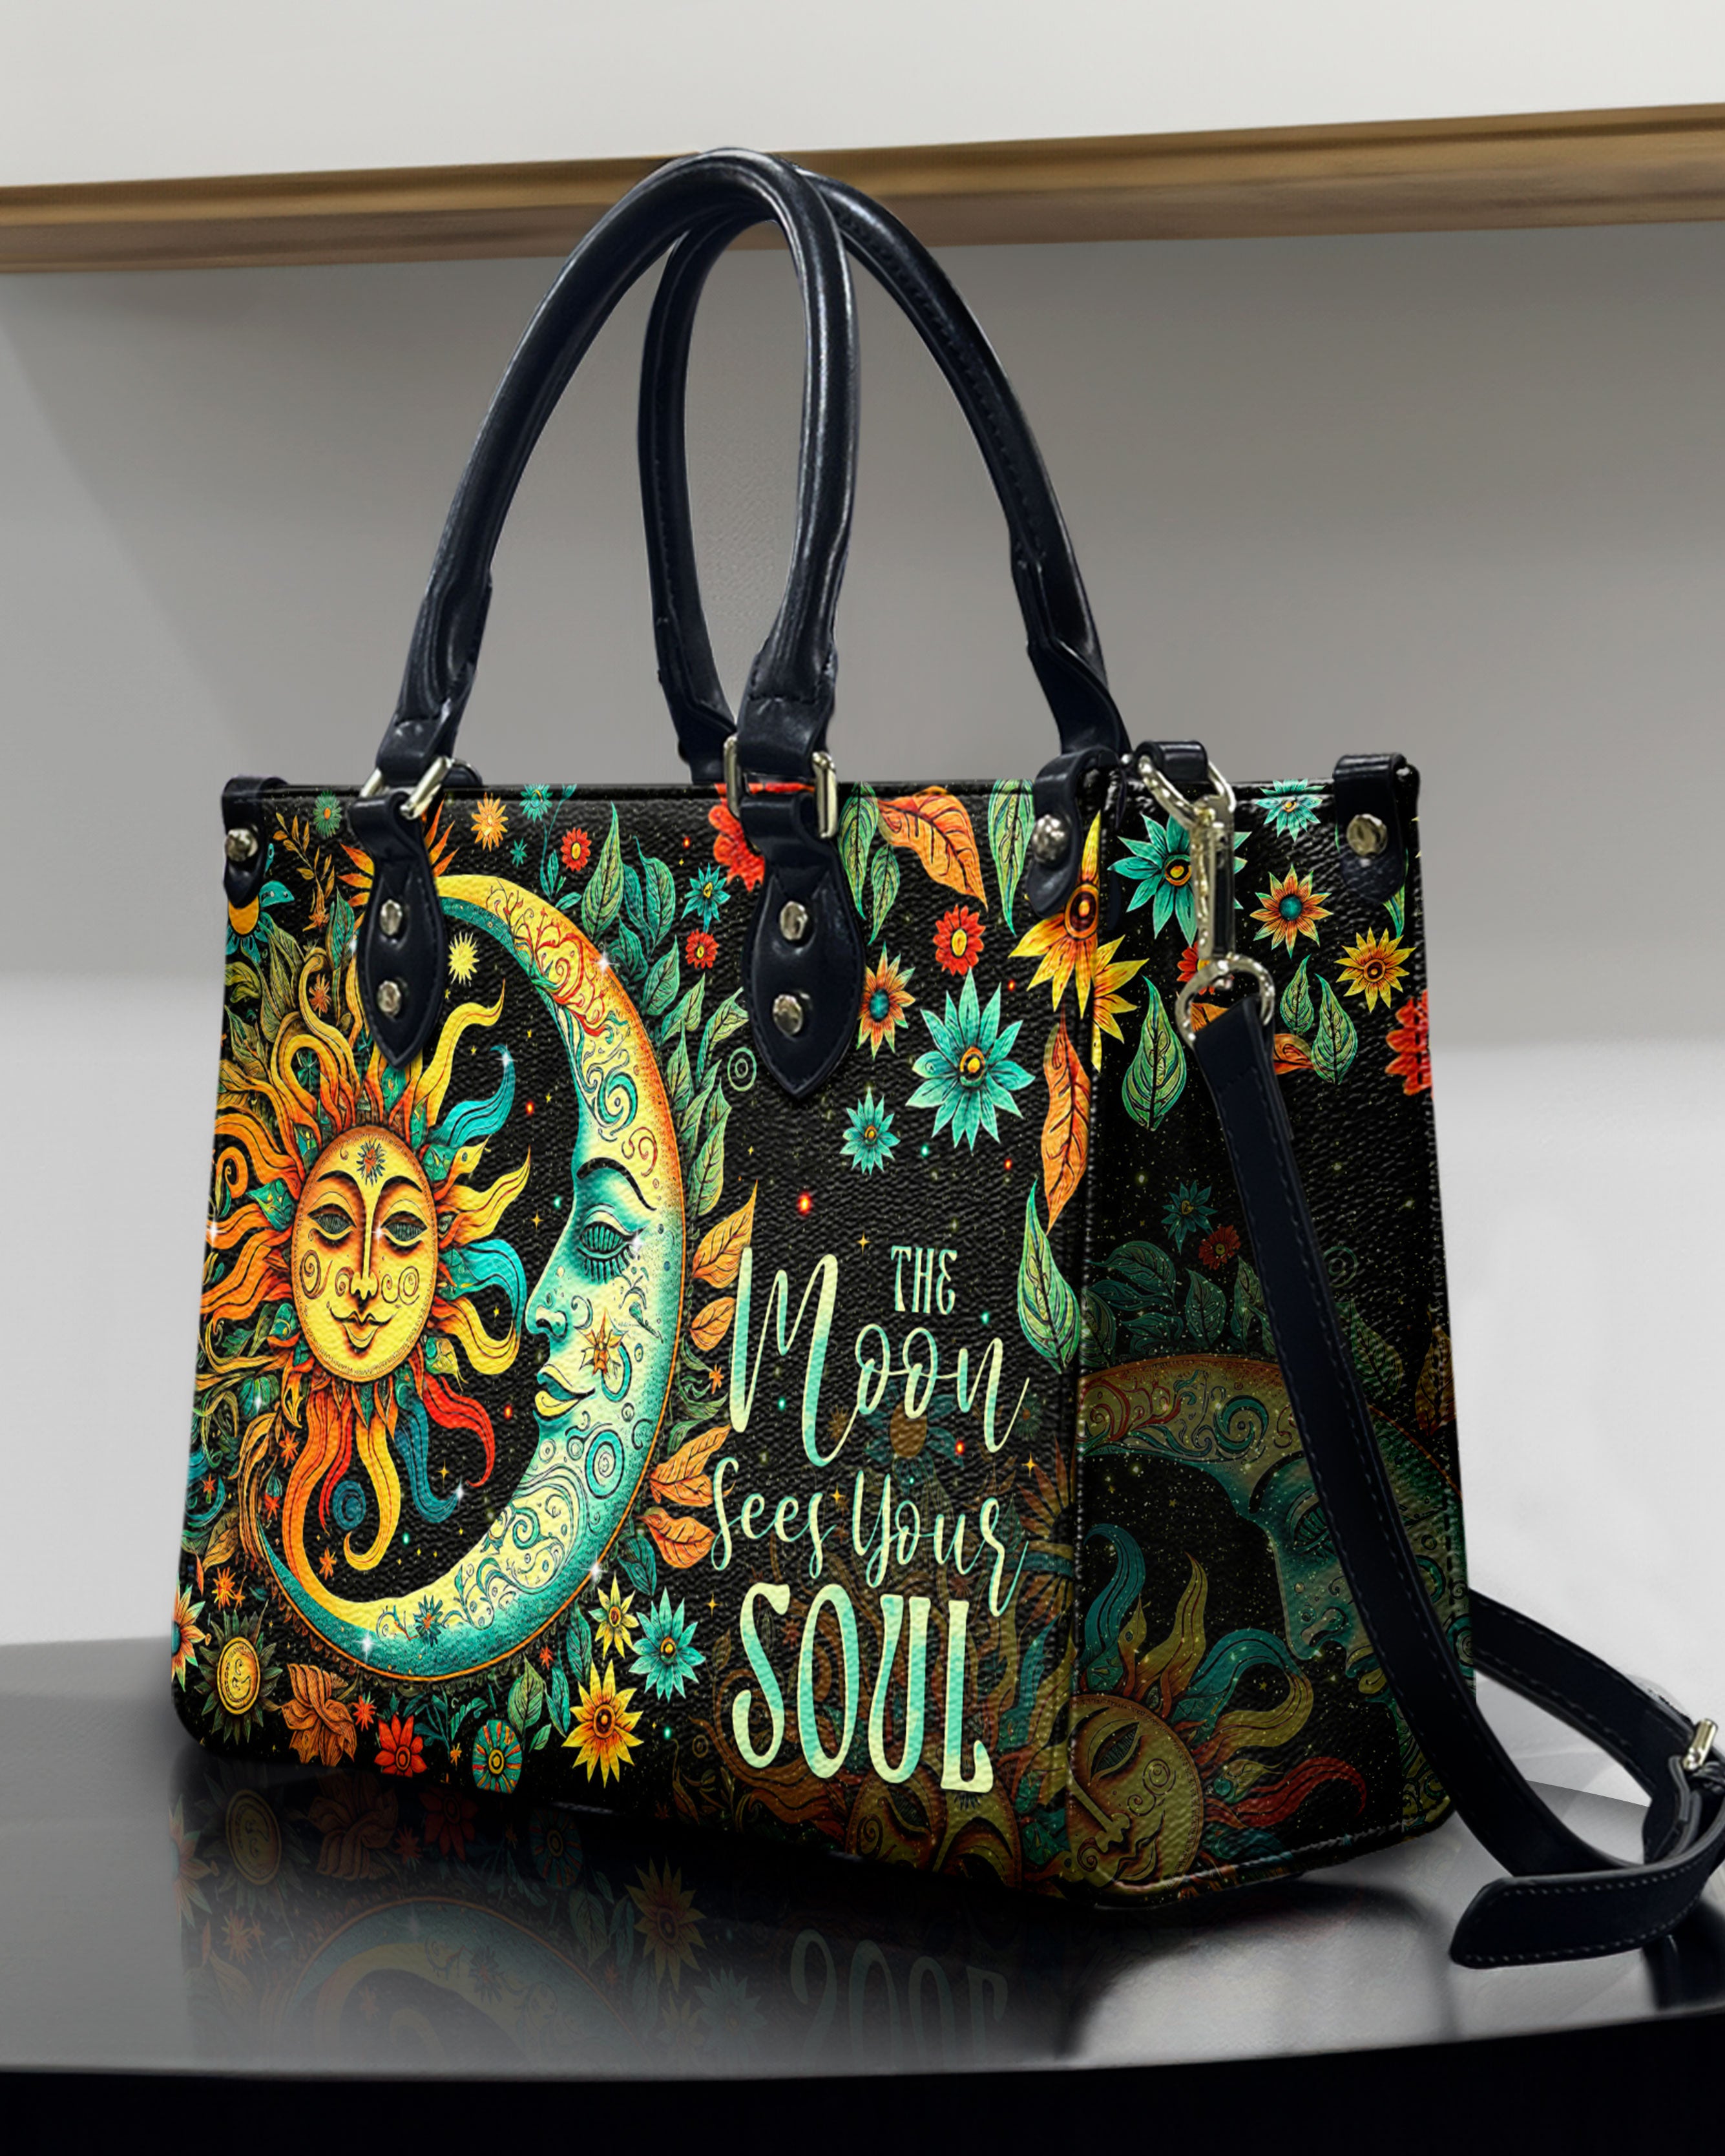 THE MOON SEES YOUR SOUL LEATHER HANDBAG - TYTM2503243